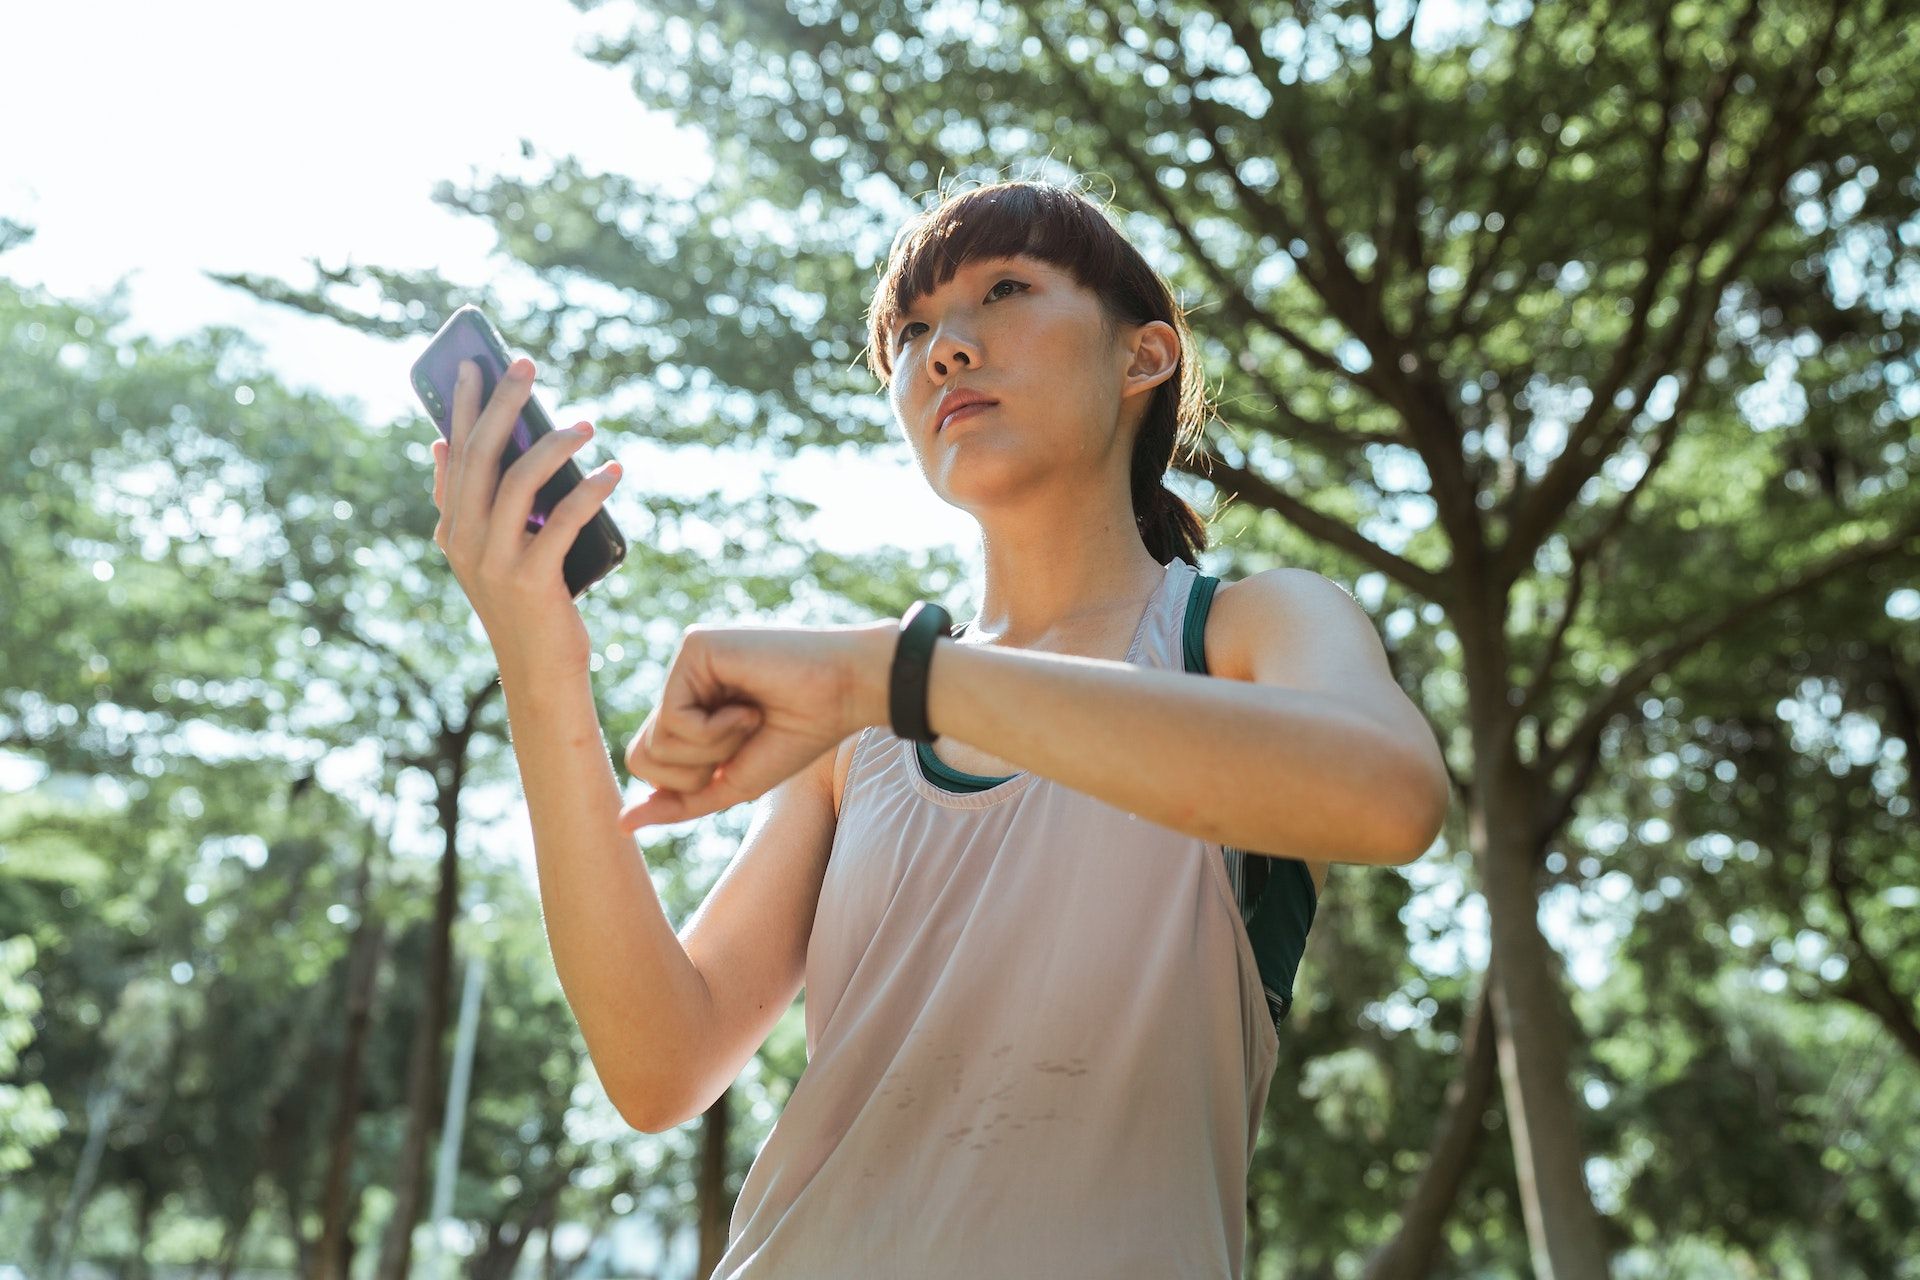 A person stops during their workout to check their heart rate using a phone and smartwatch.